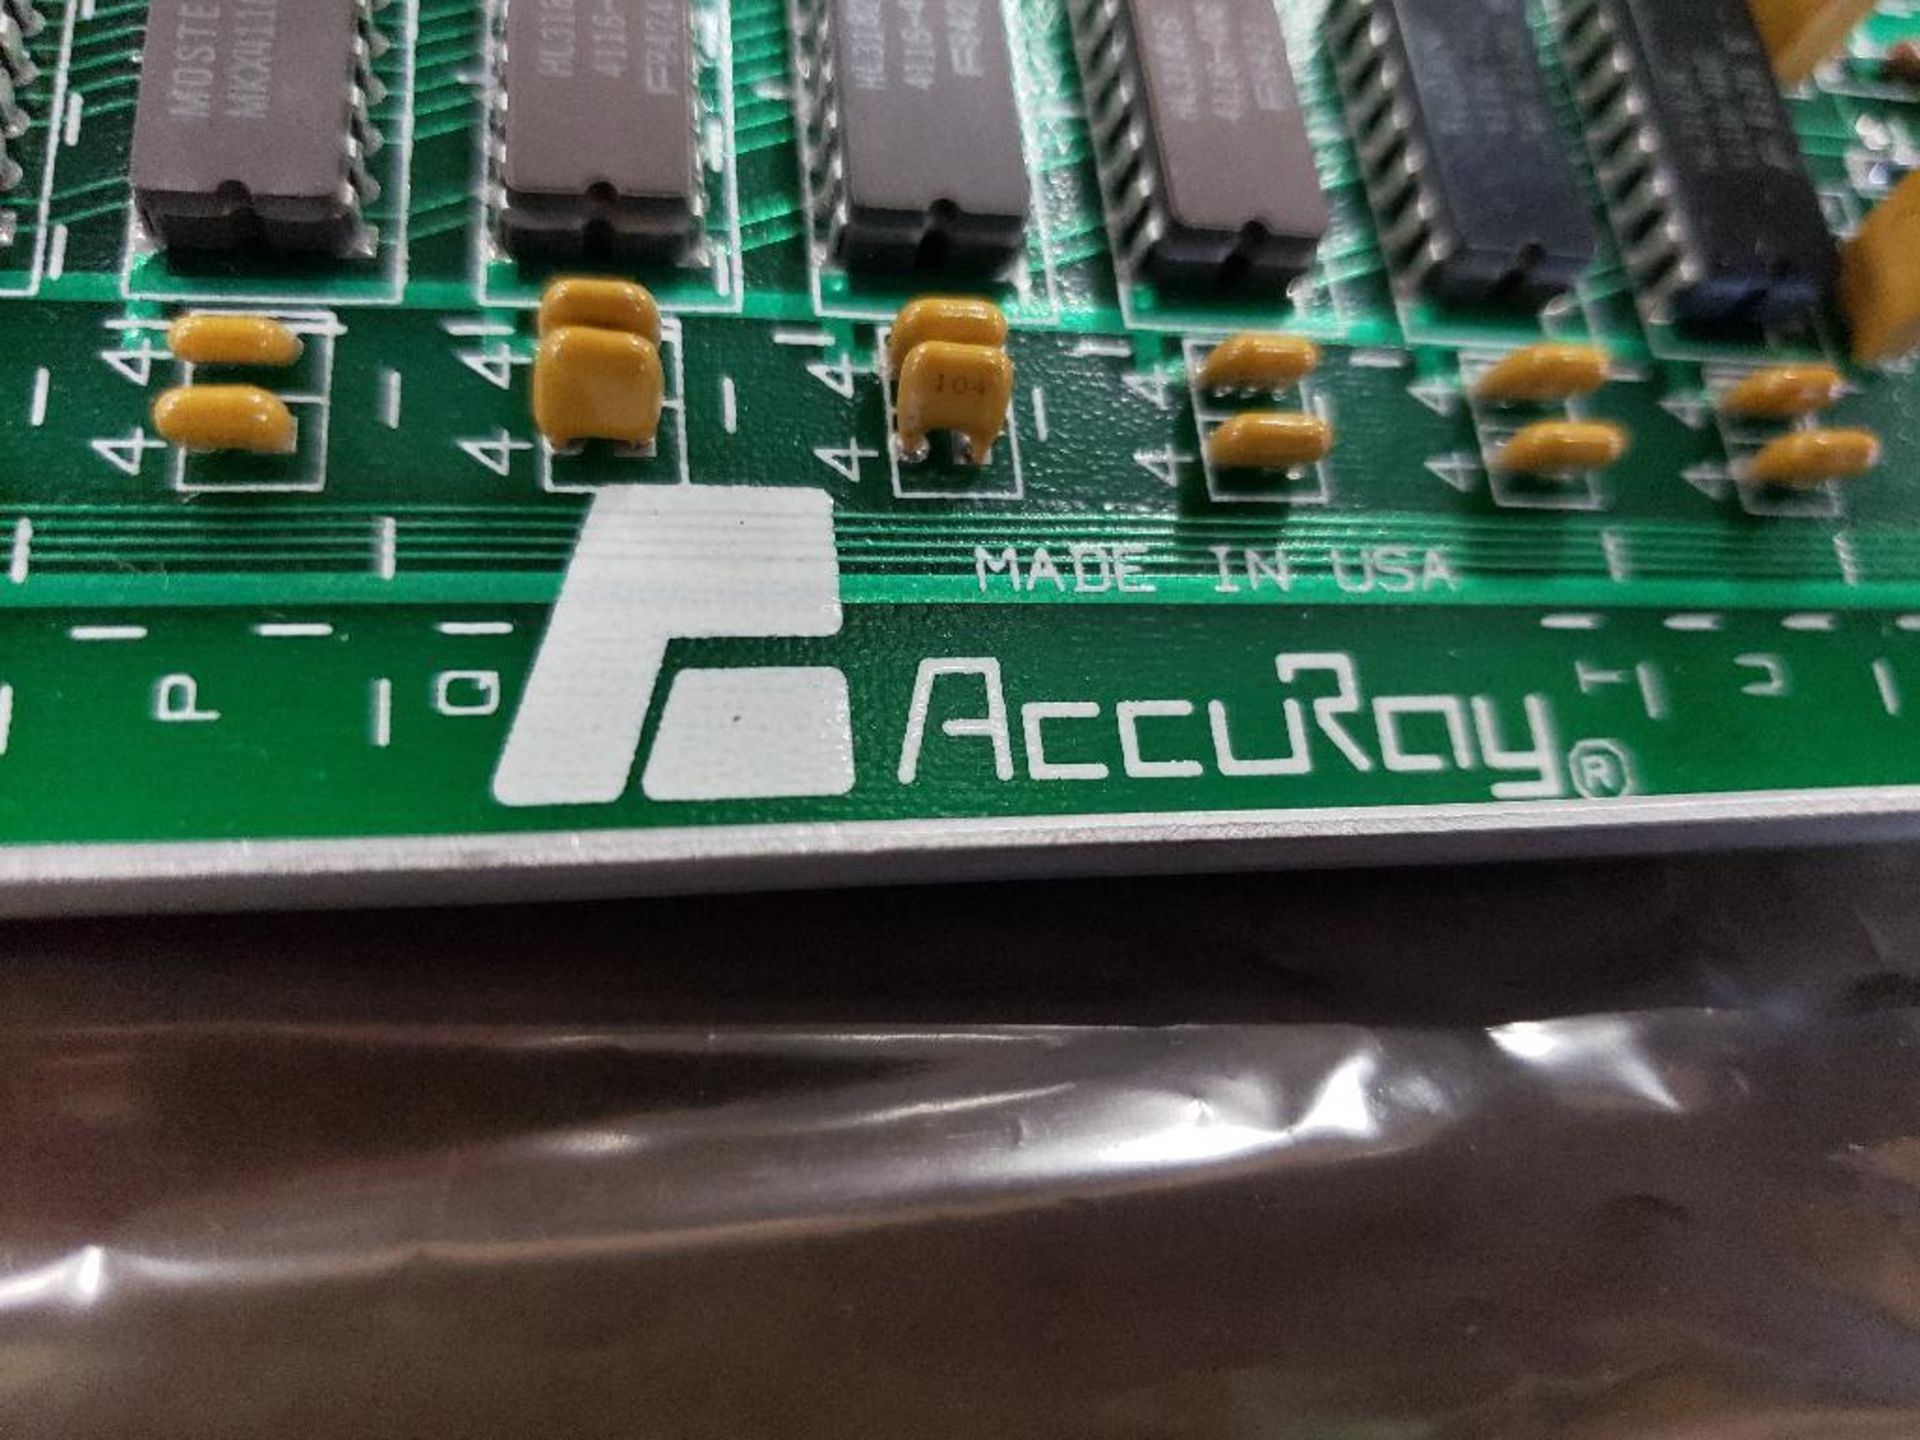 AccuRay 69242-002 PC Board. - Image 5 of 6